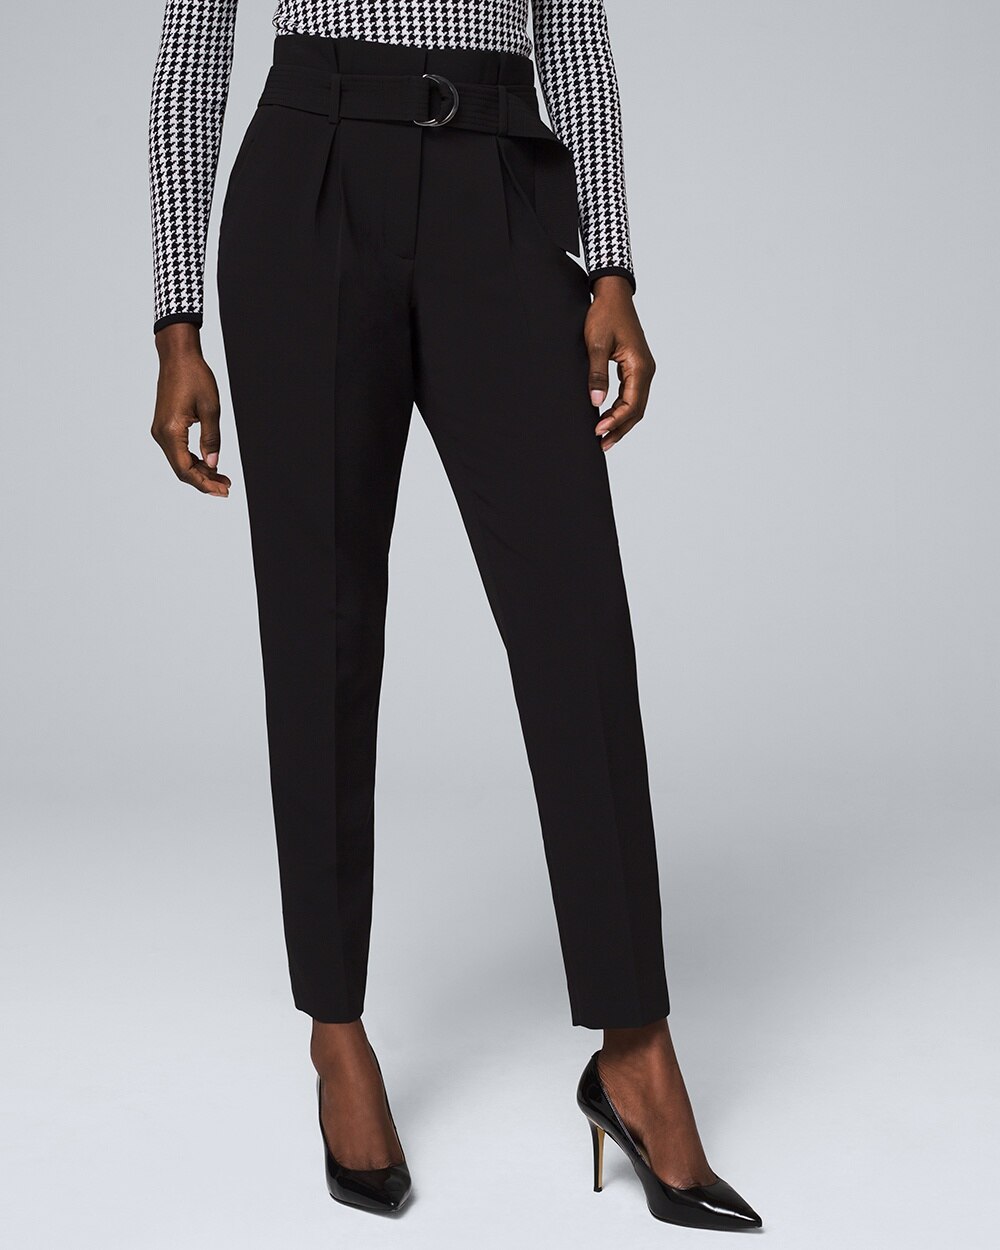 High-Waist Tapered Ankle Pants - White House Black Market